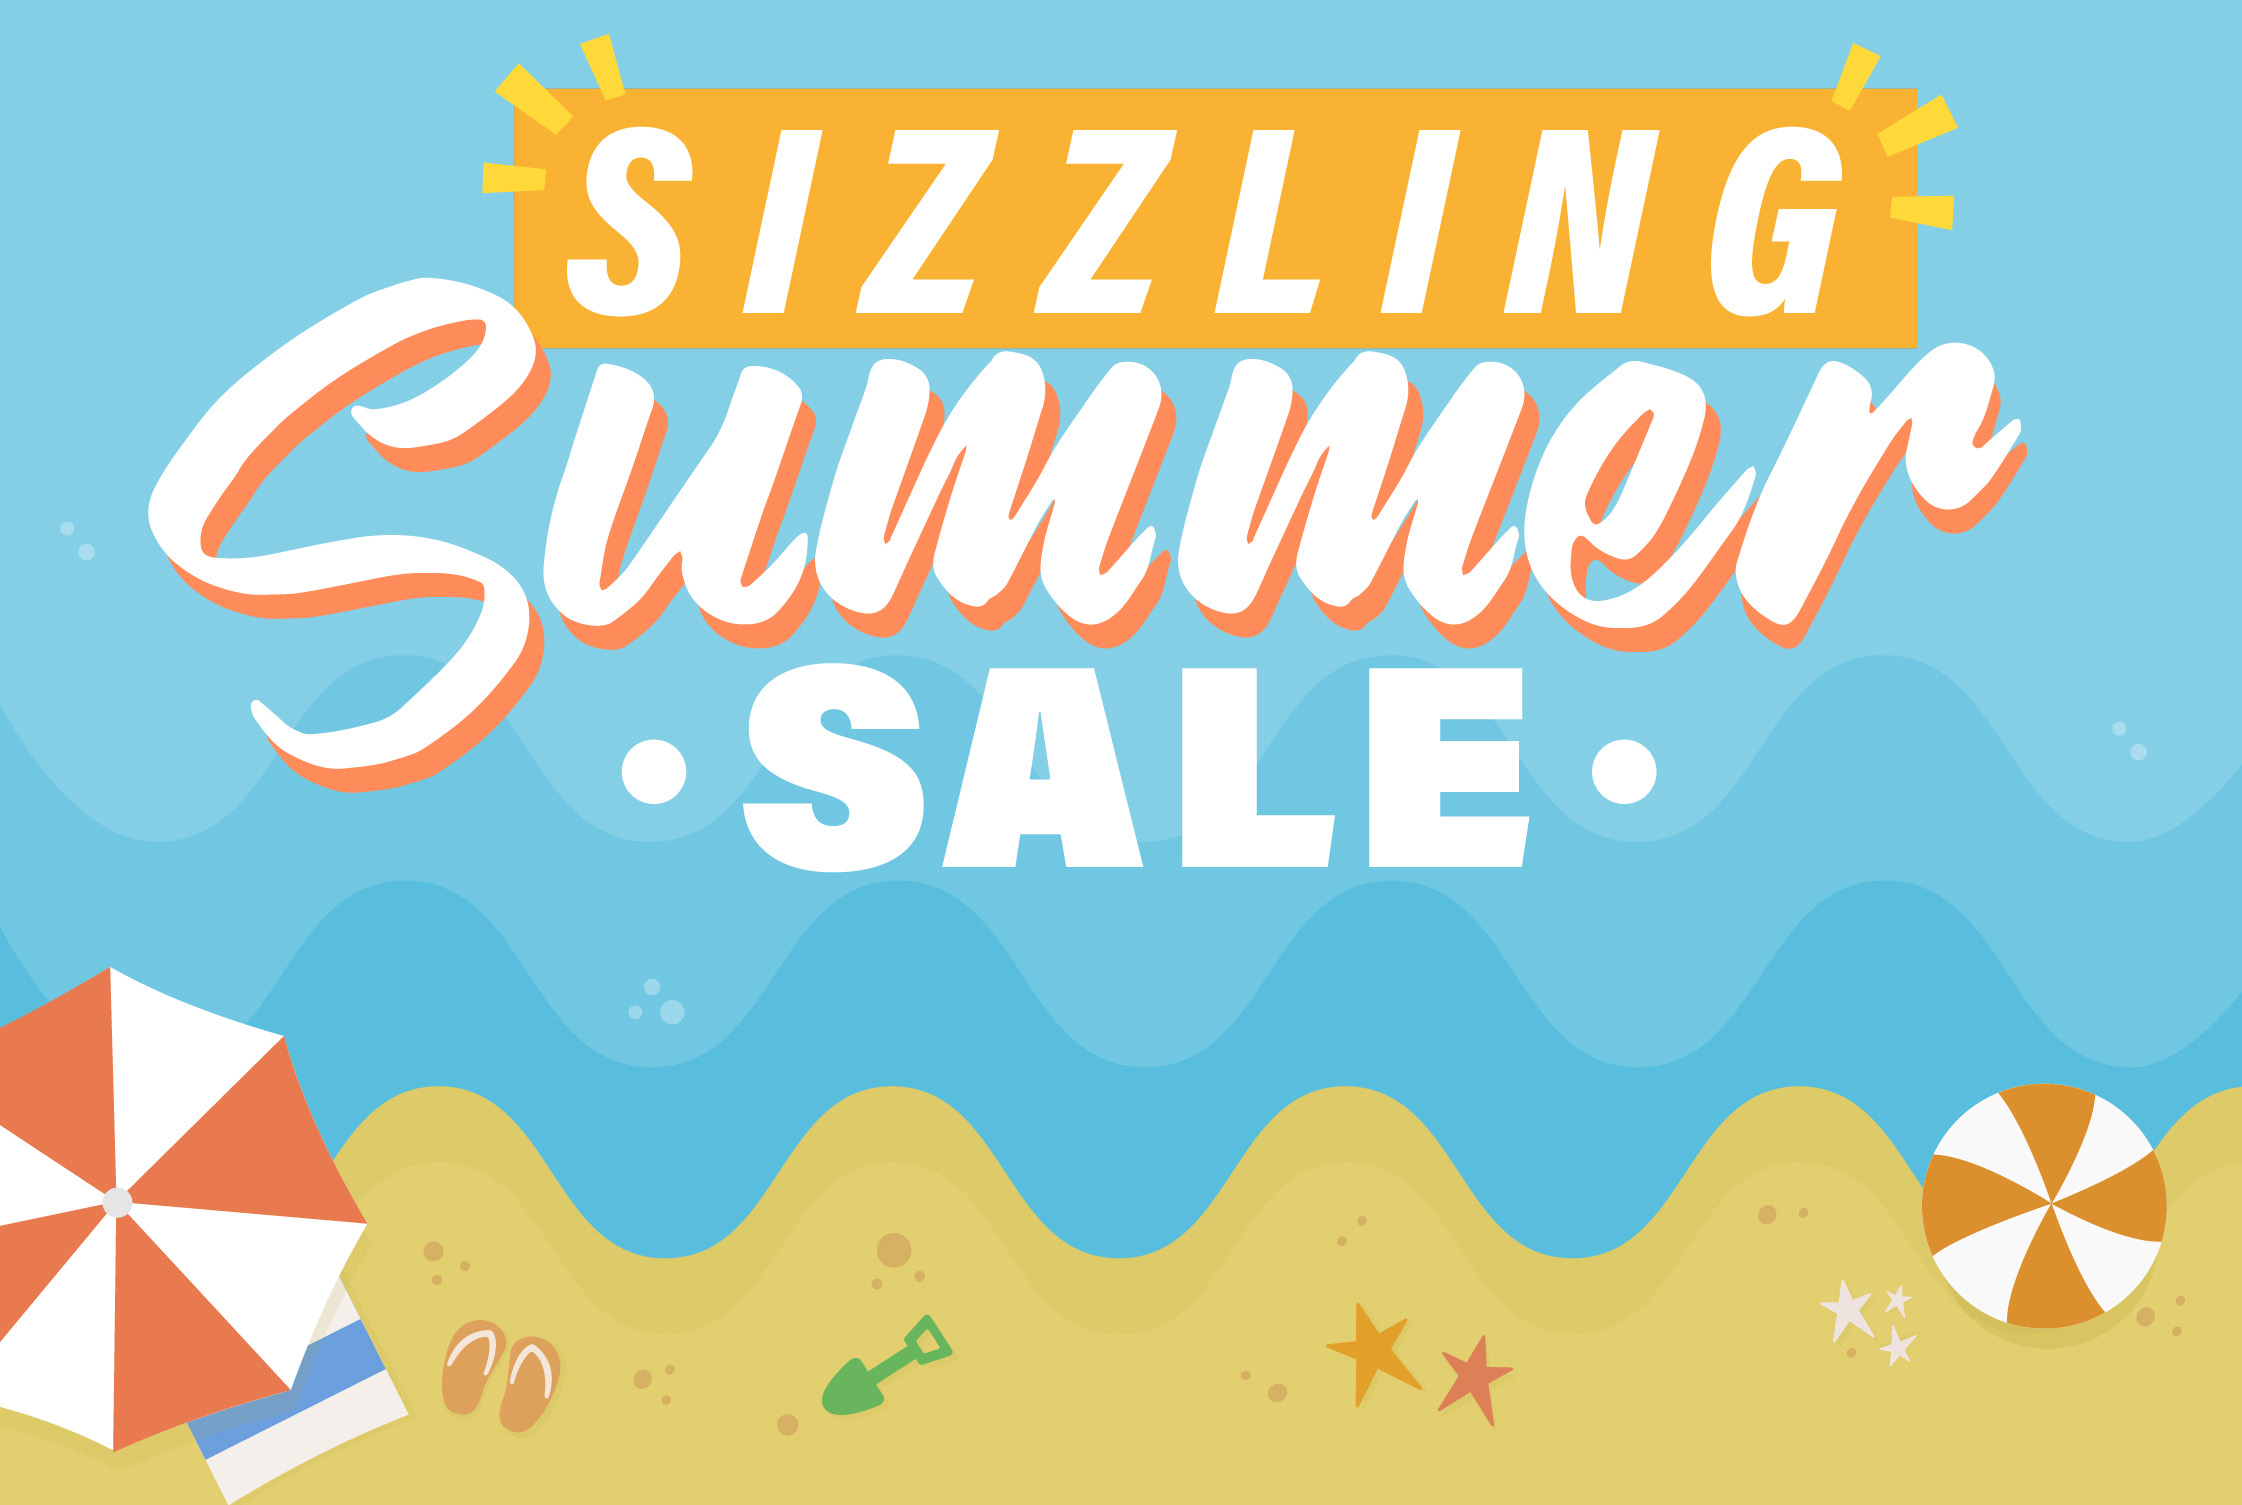 Take advantage of our sizzling summer sale! - Packer